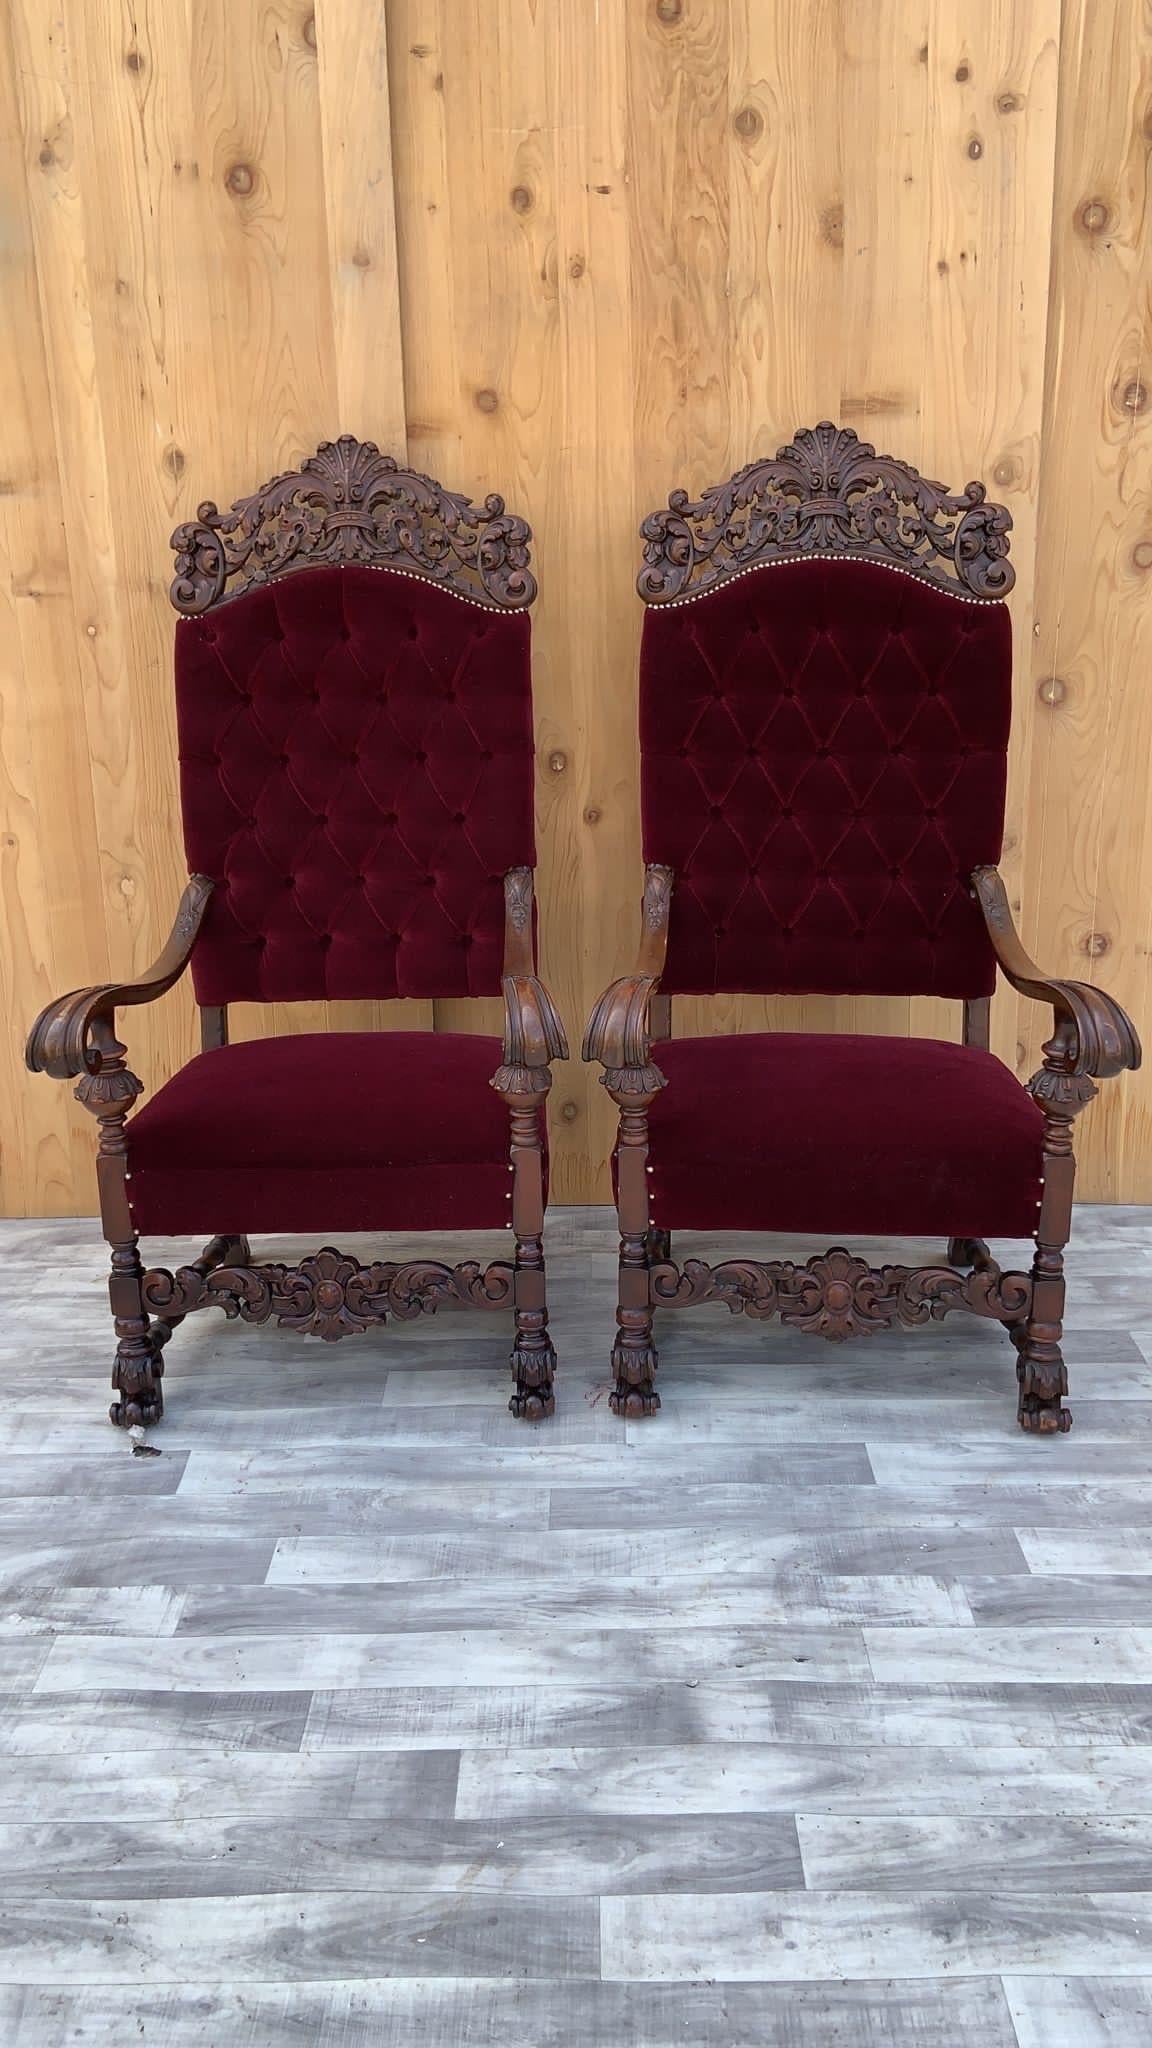 Antique French Regency Style Caved Walnut Throne Chairs Newly Upholstered, Pair For Sale 3